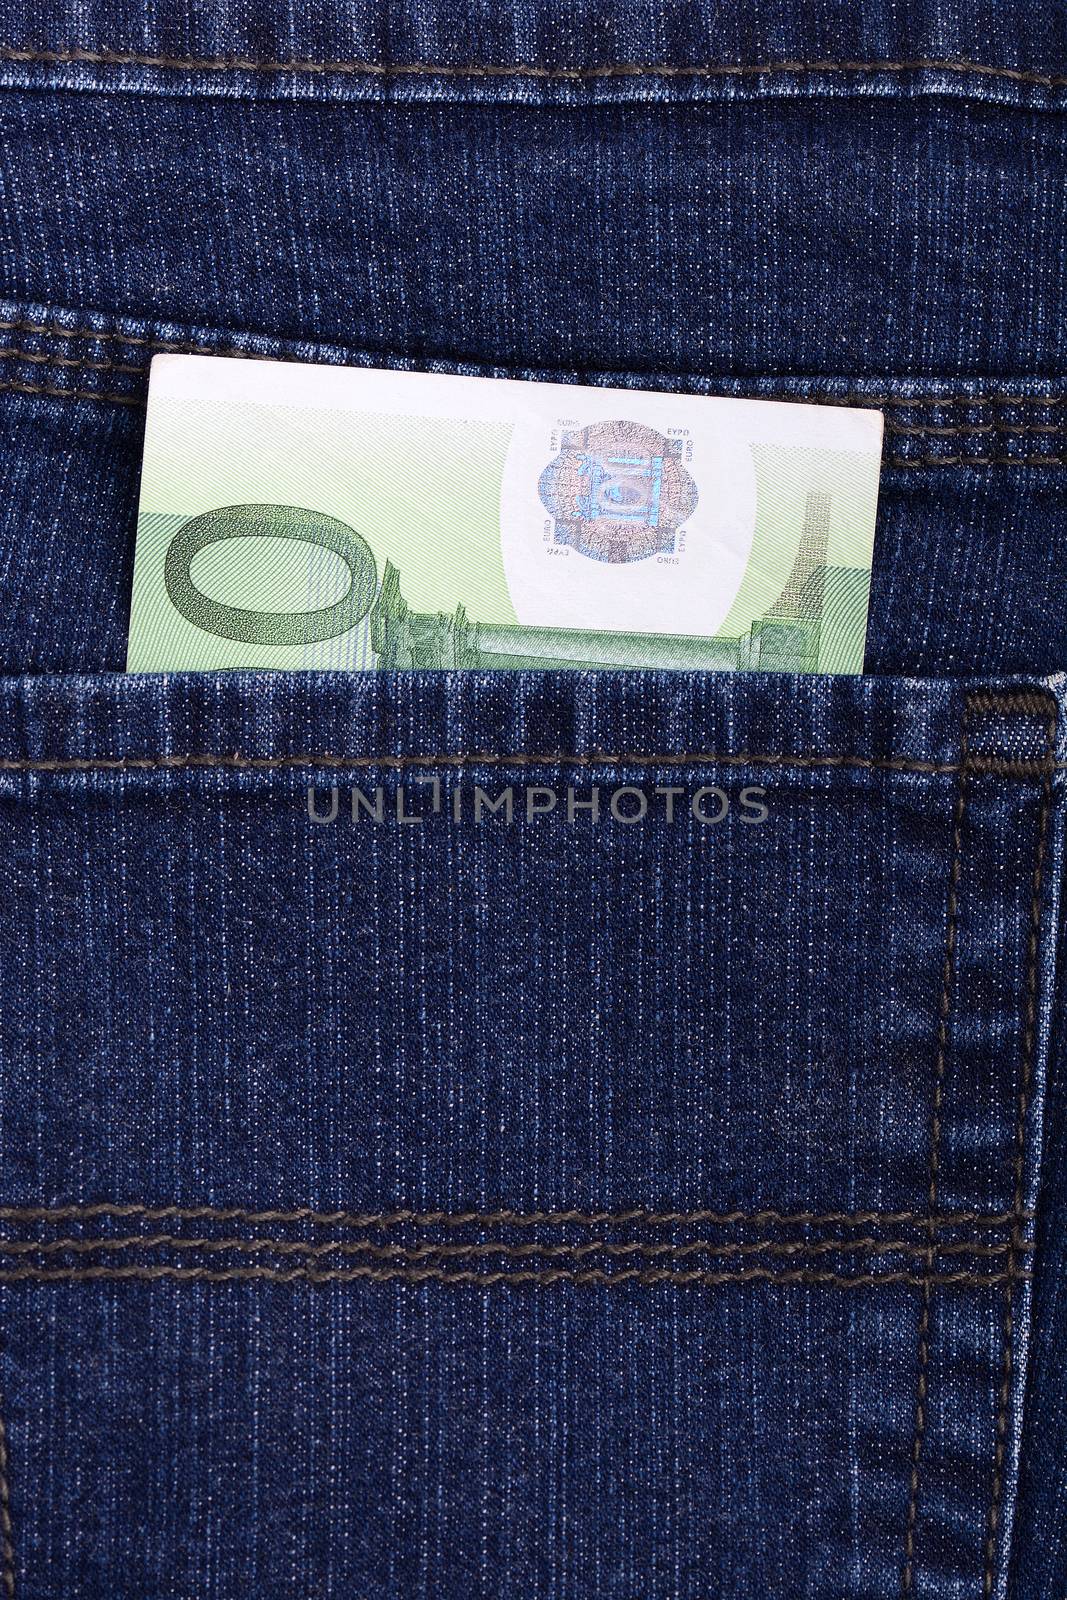 Euro notes in jeans pocket. European money. Jeans texture. Business concept